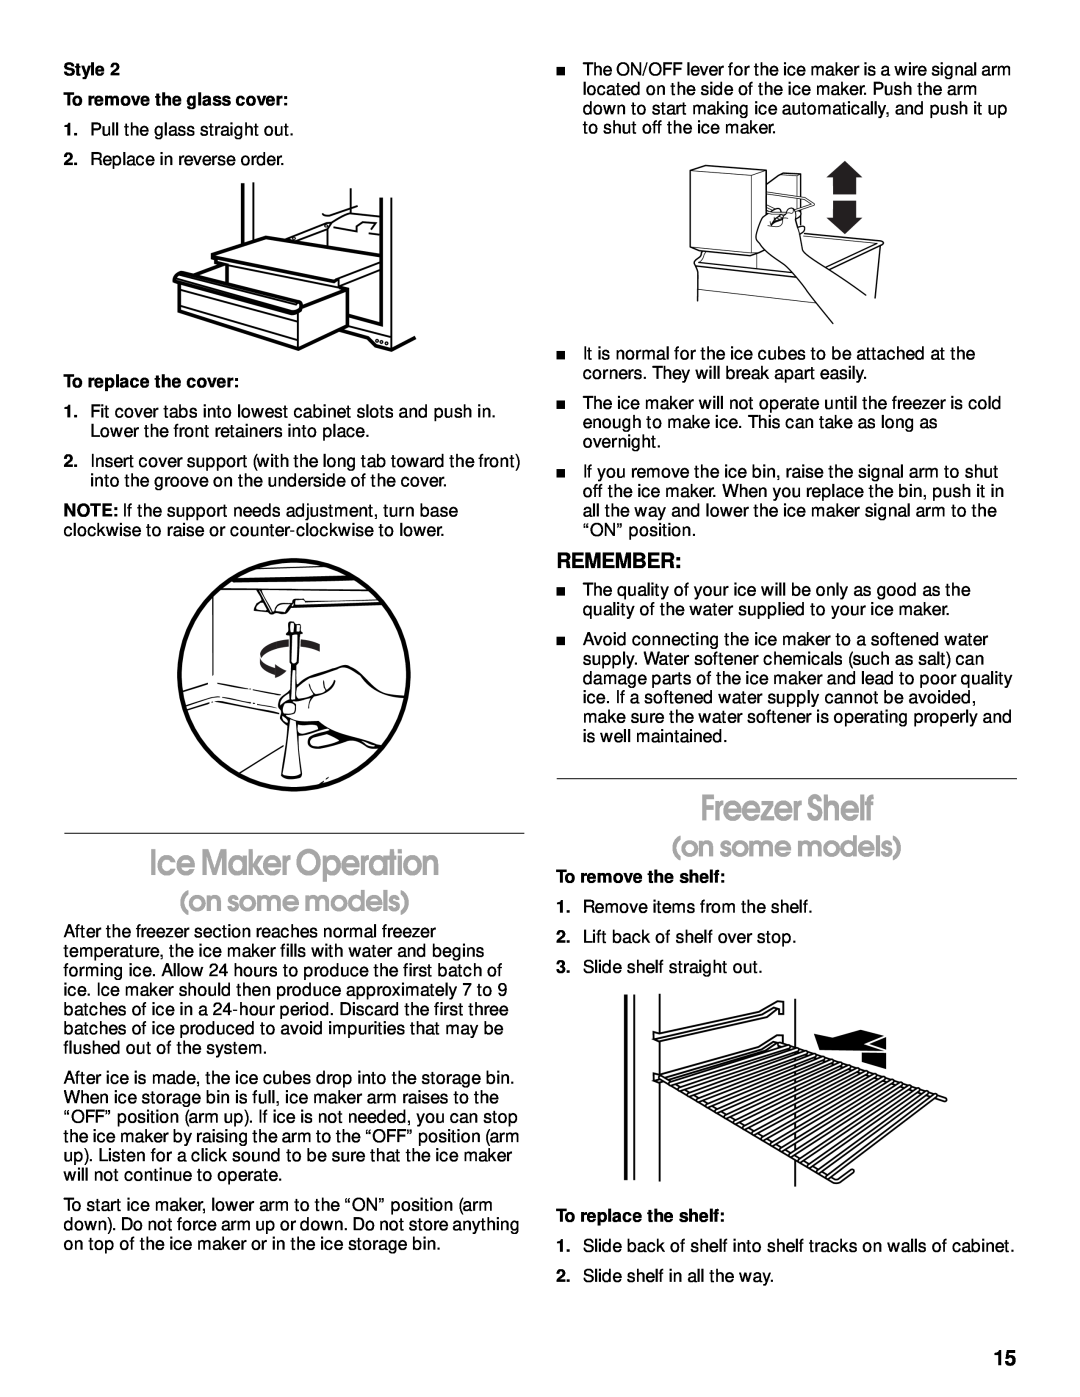 Whirlpool TT14DKXJW00 manual Ice Maker Operation, Freezer Shelf, Remember, on some models, Style To remove the glass cover 